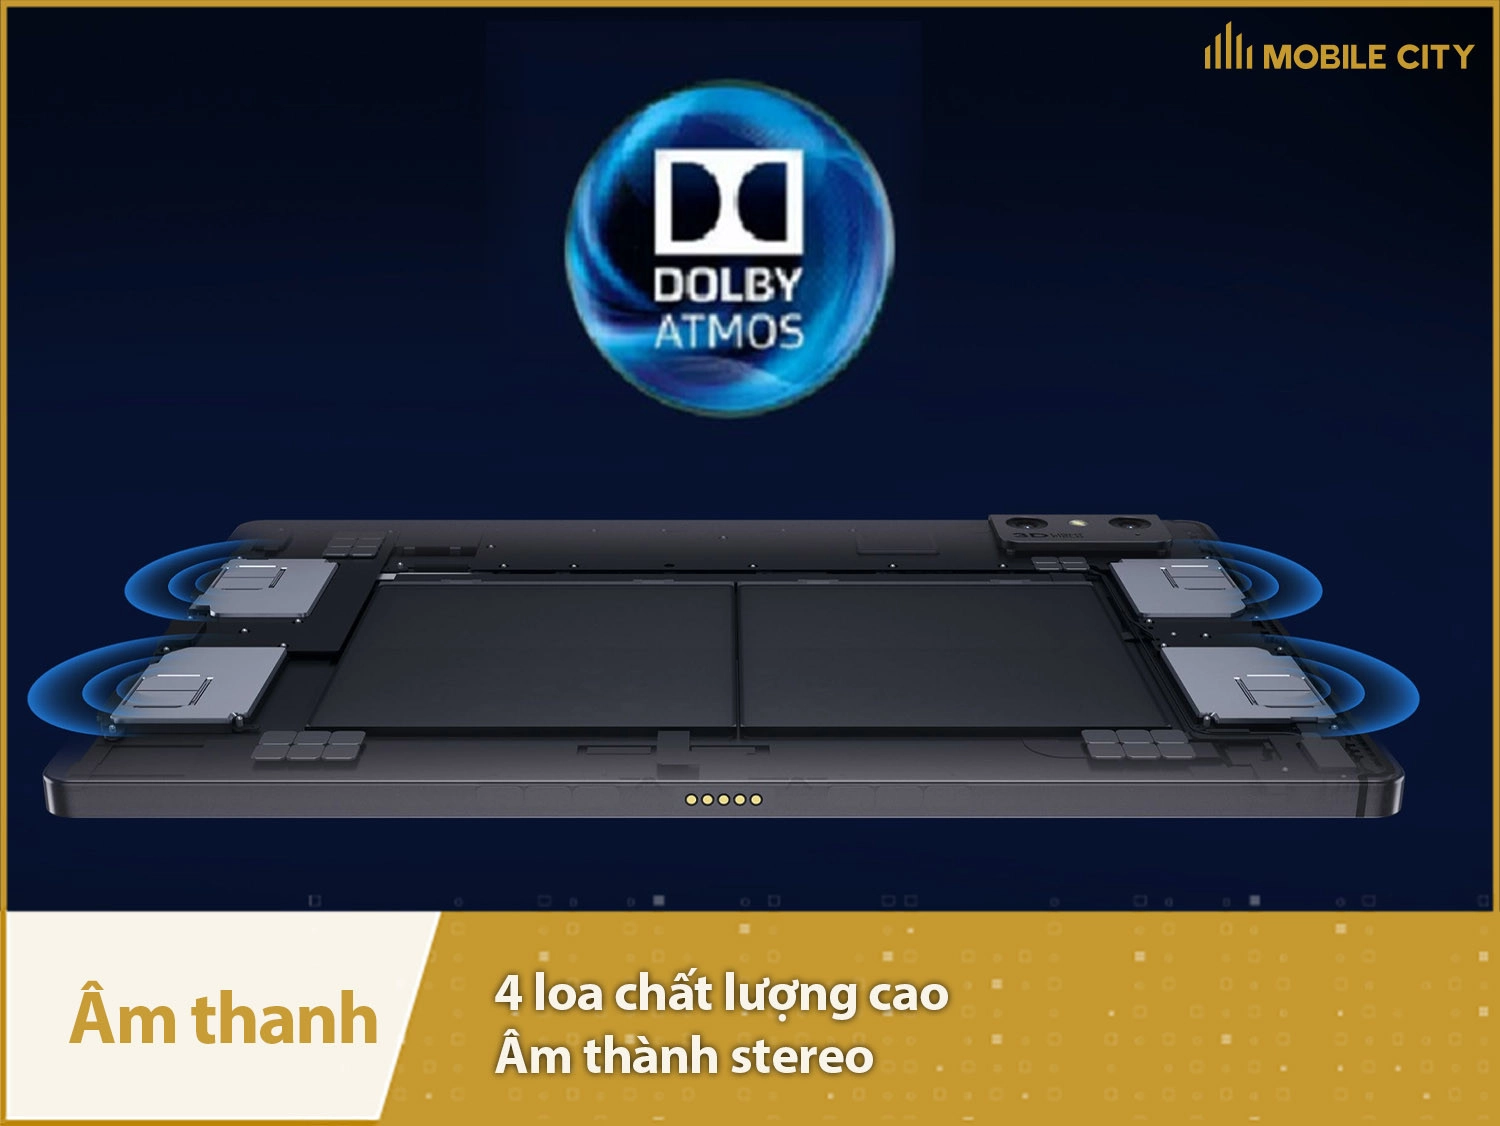 zte-nubia-pad-3d-danh-gia-am-thanh